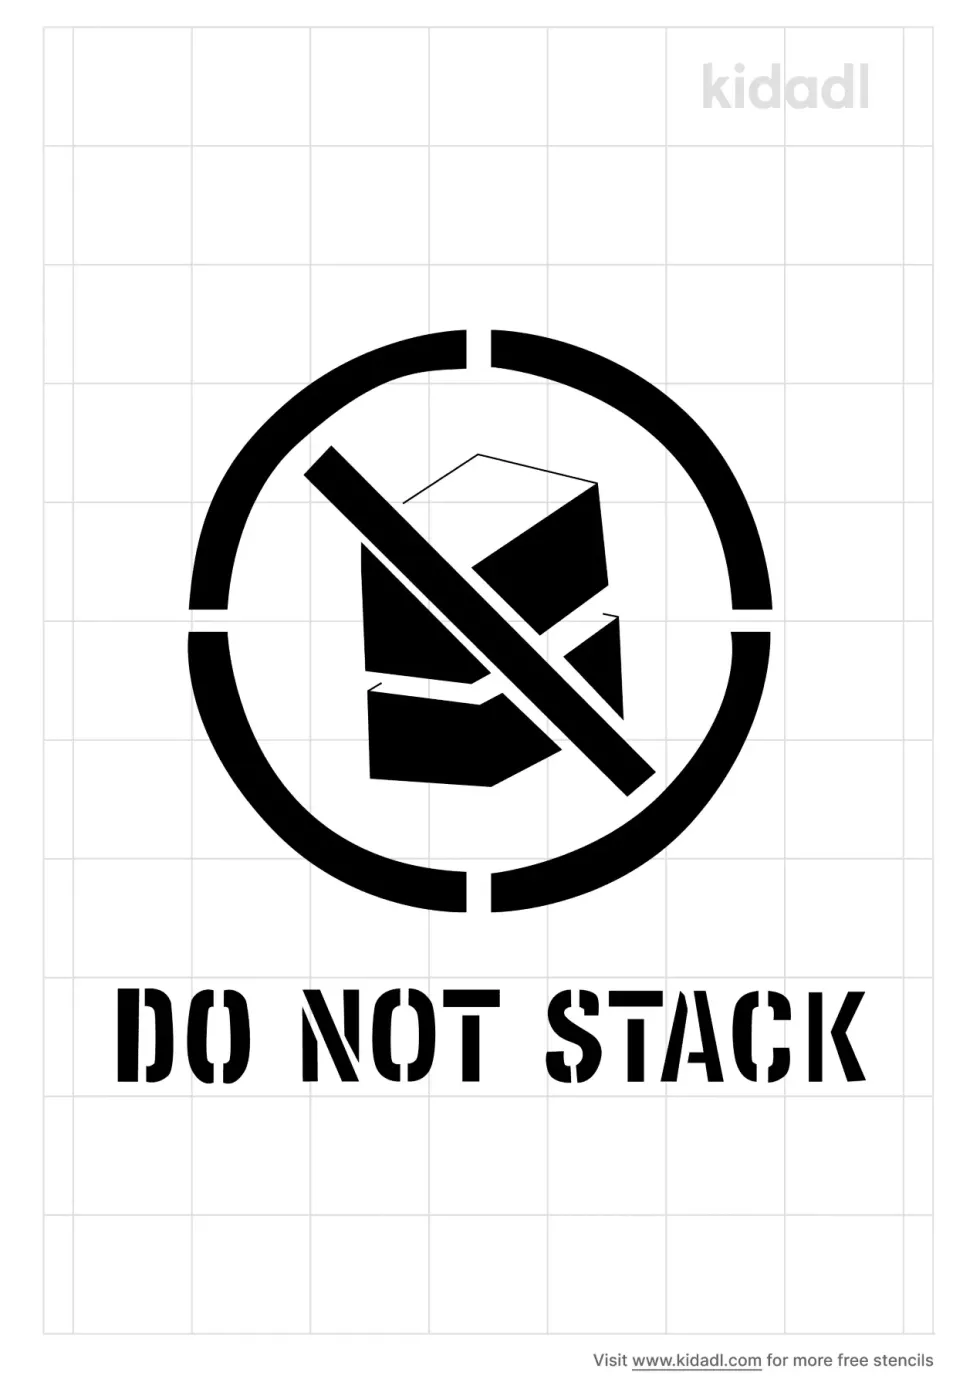 Don't Stack